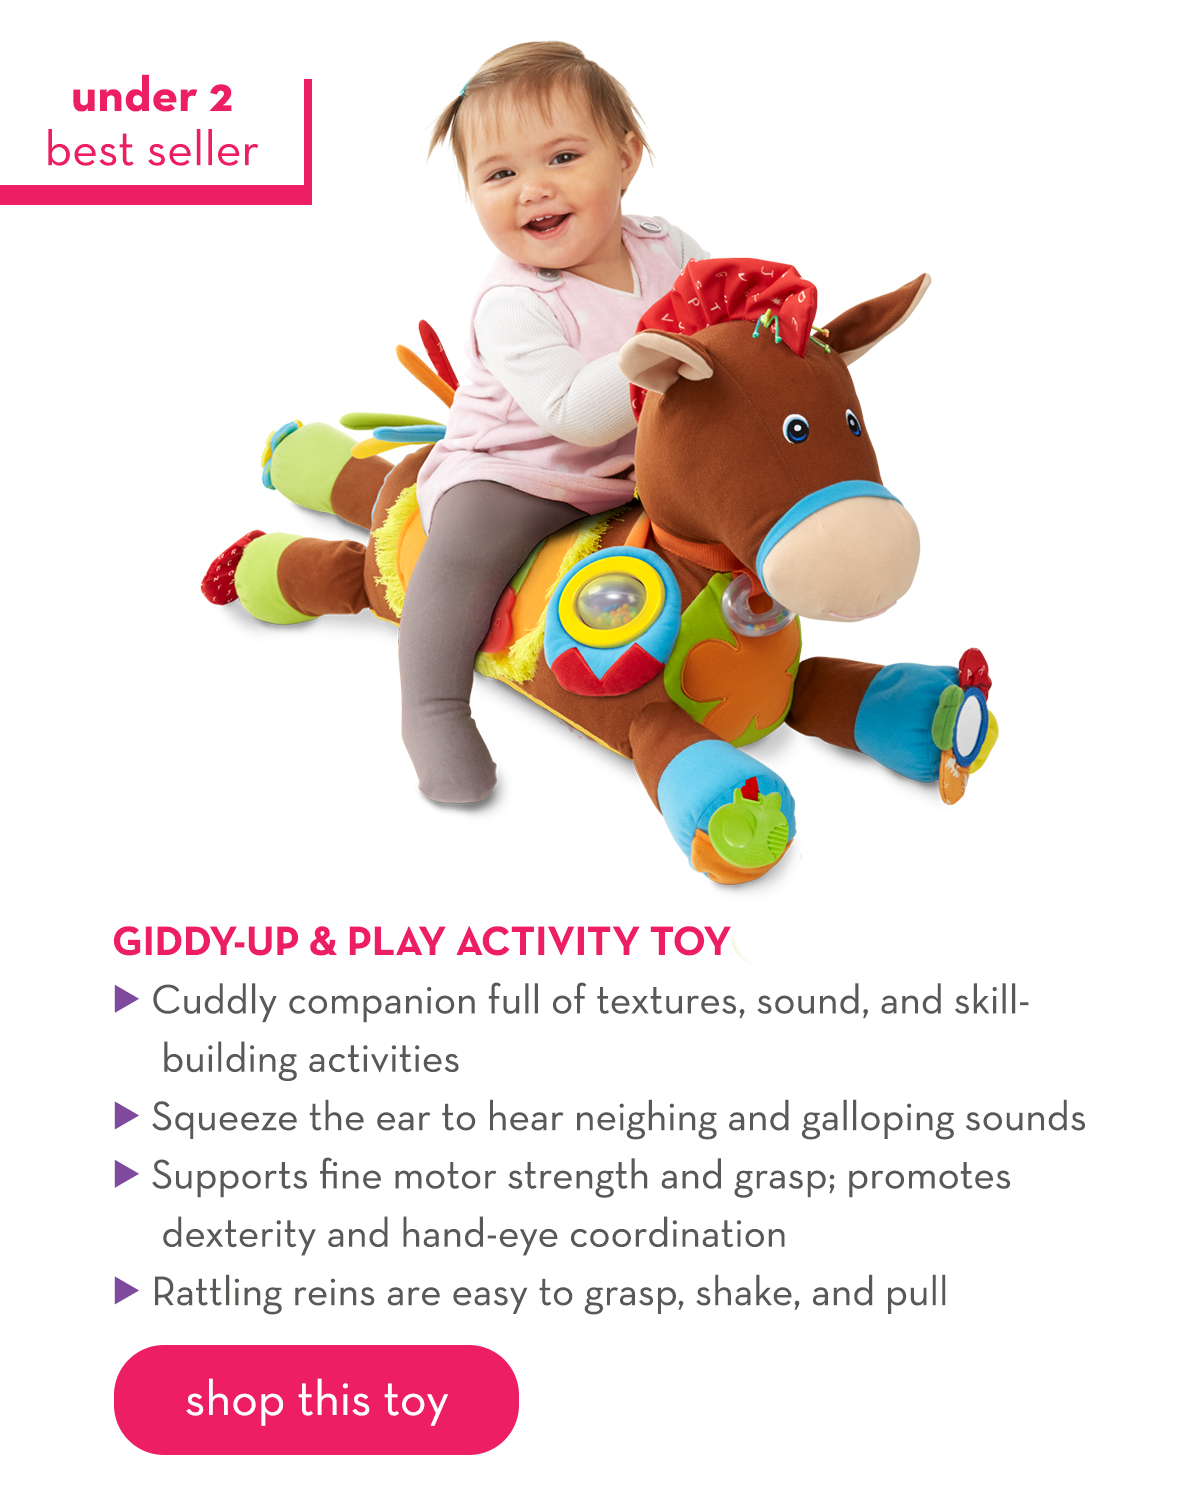 Under 2 Best Seller - Giddy-Up and Play Activity Toy